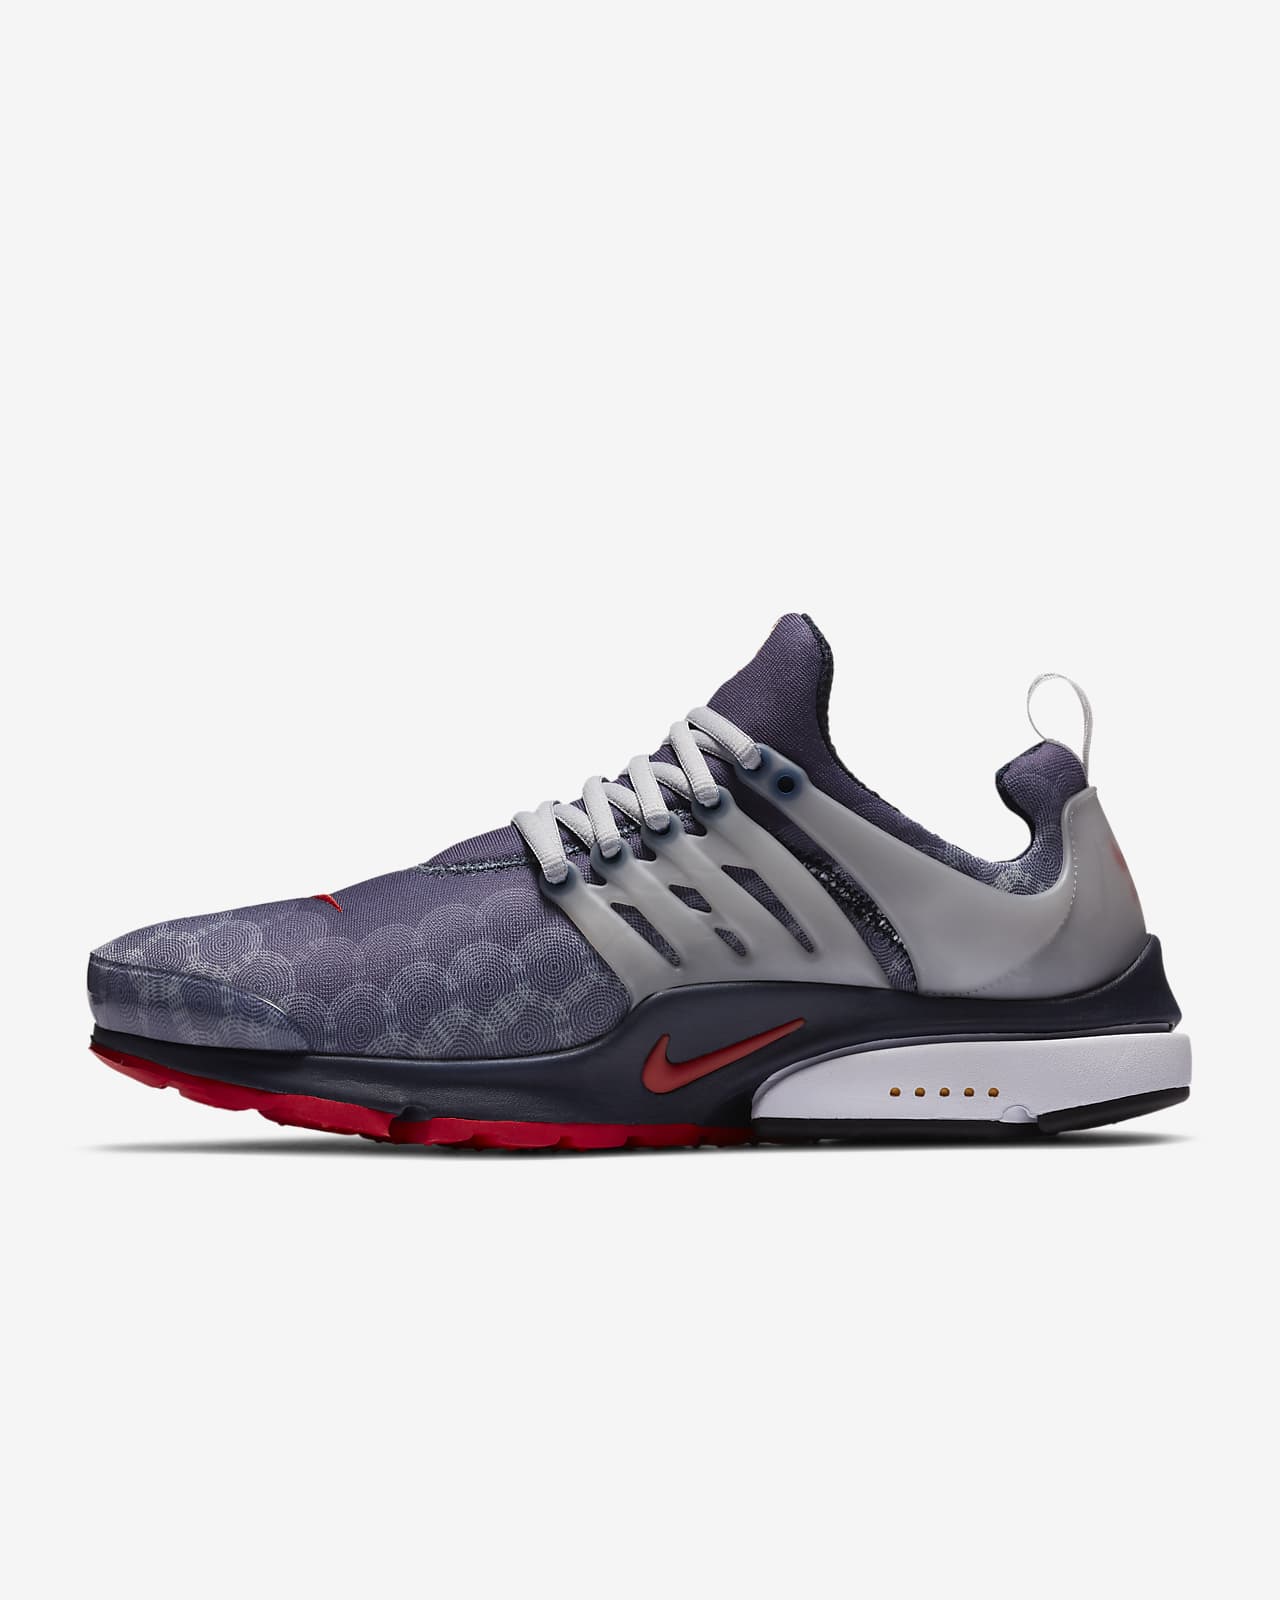 are nike air presto good for running